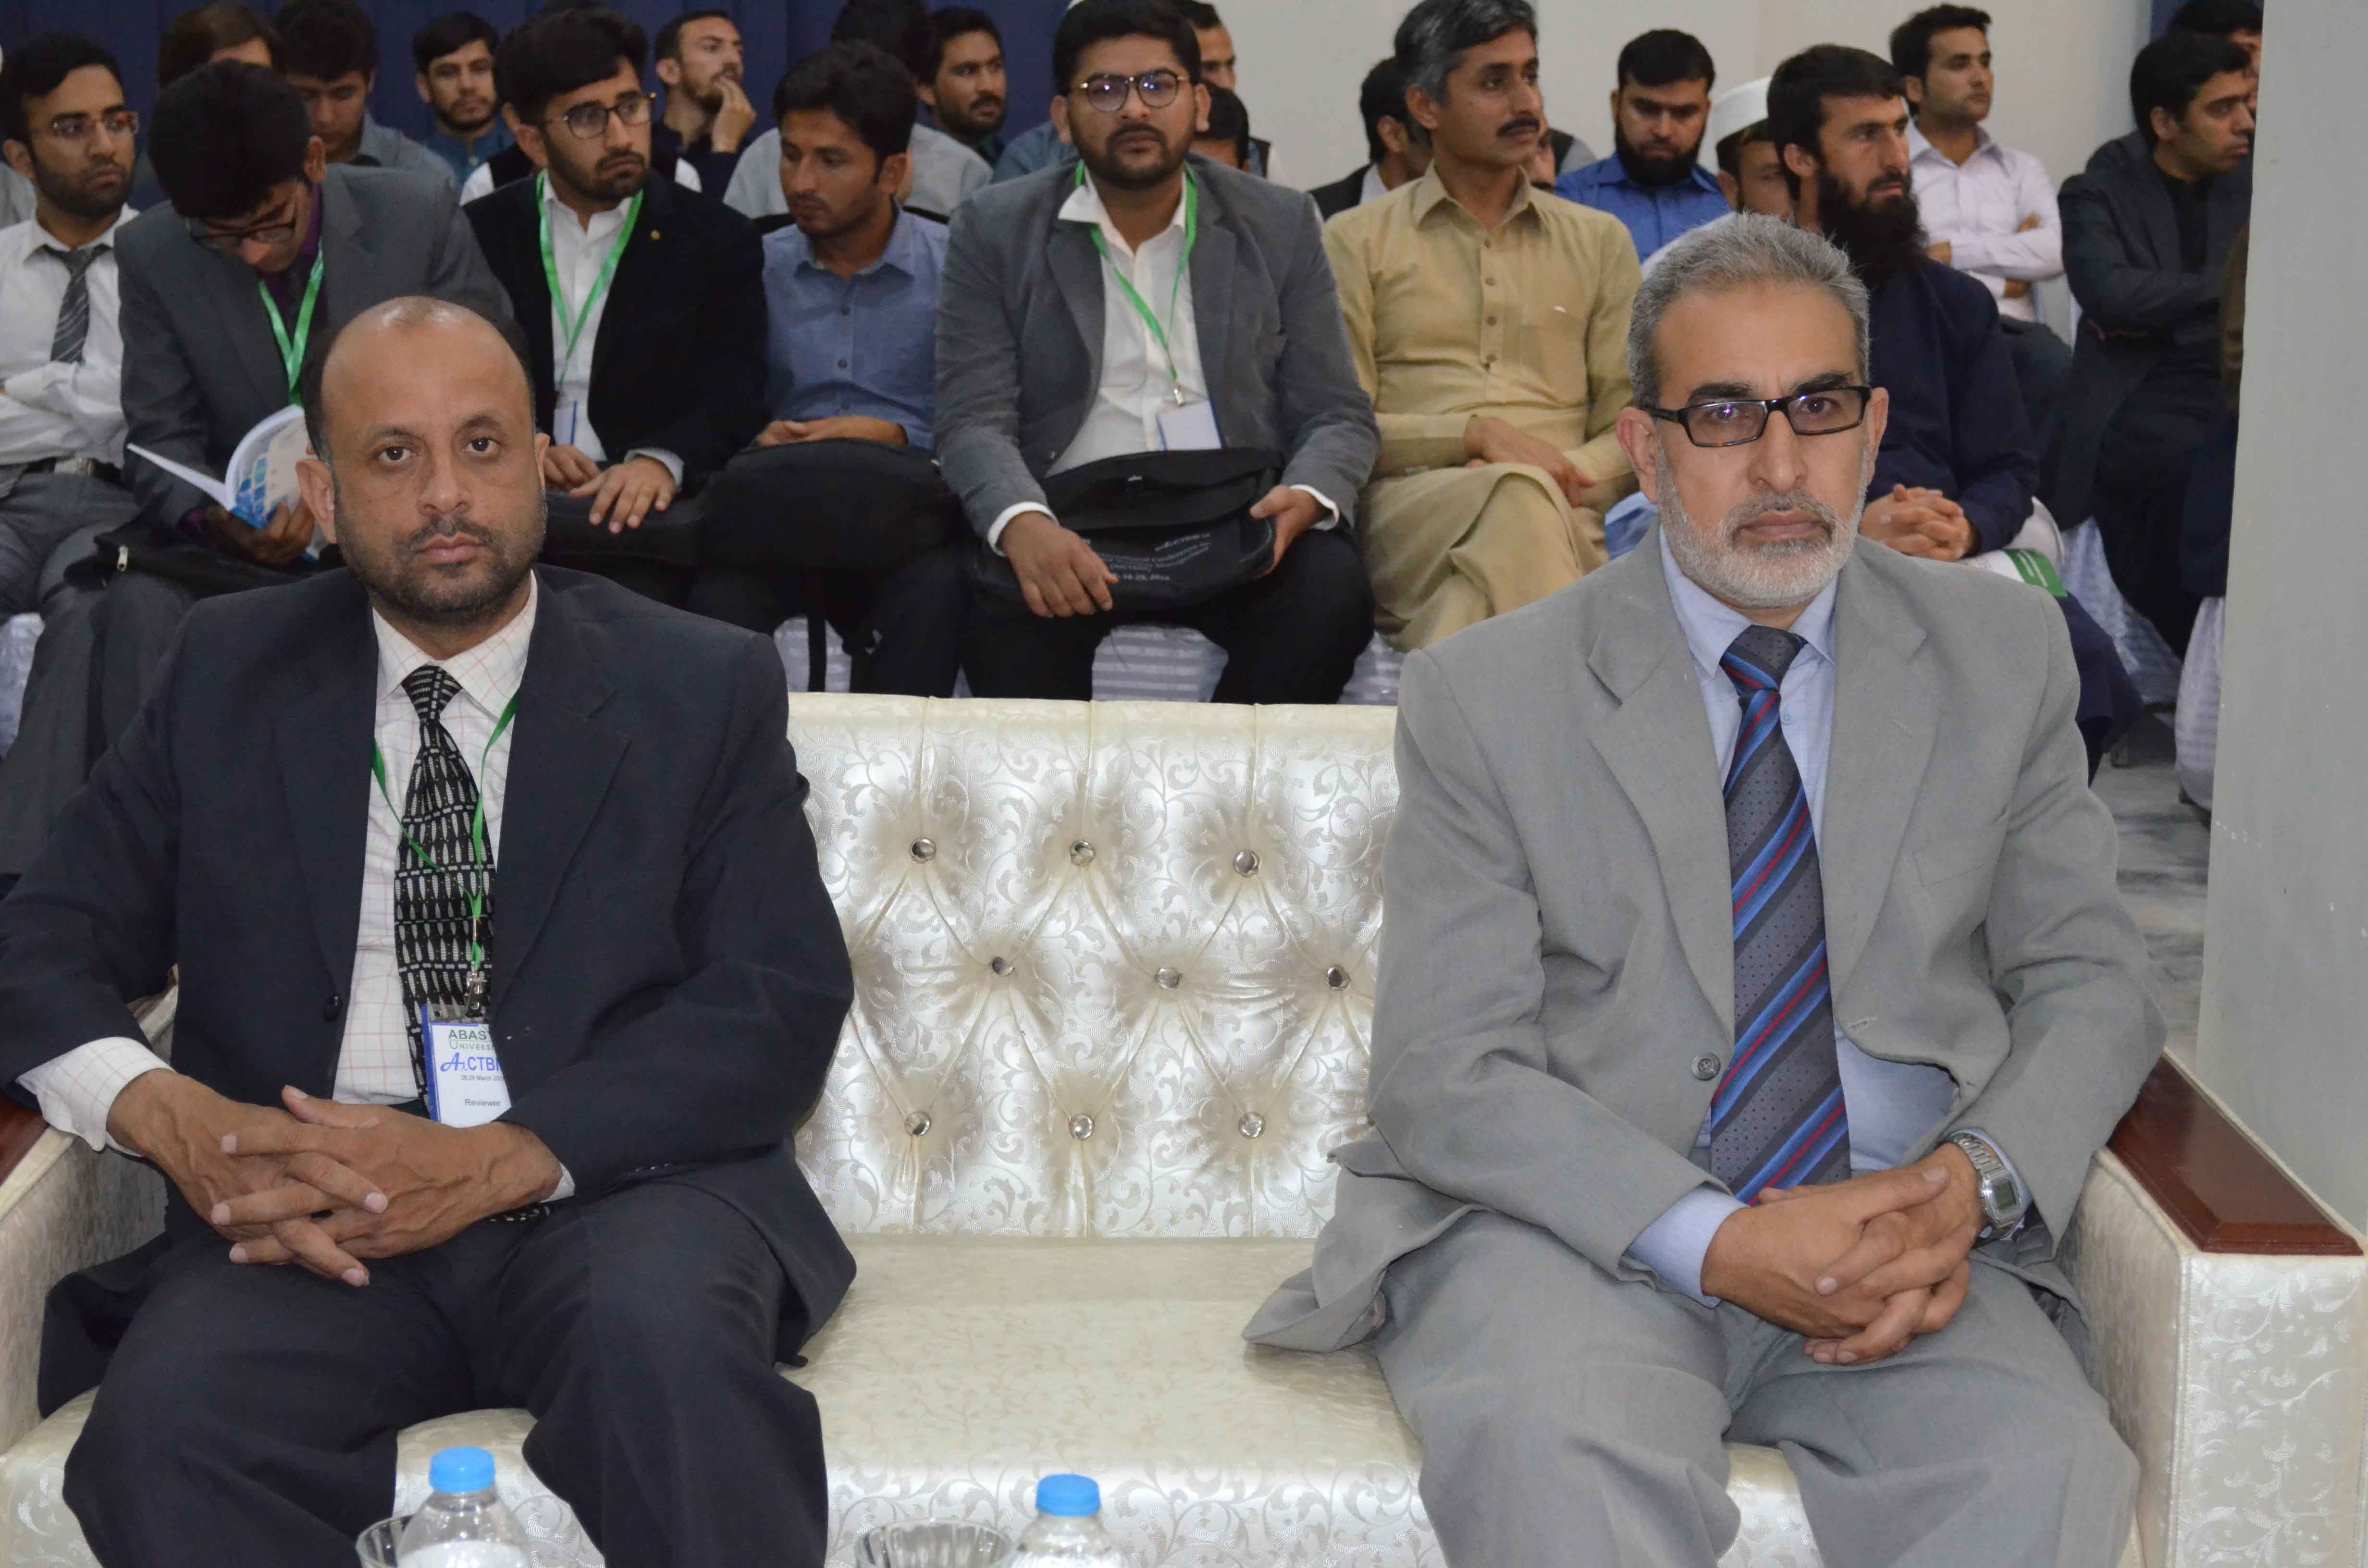 Honorable guests are listening the speech by different scholars at the conference